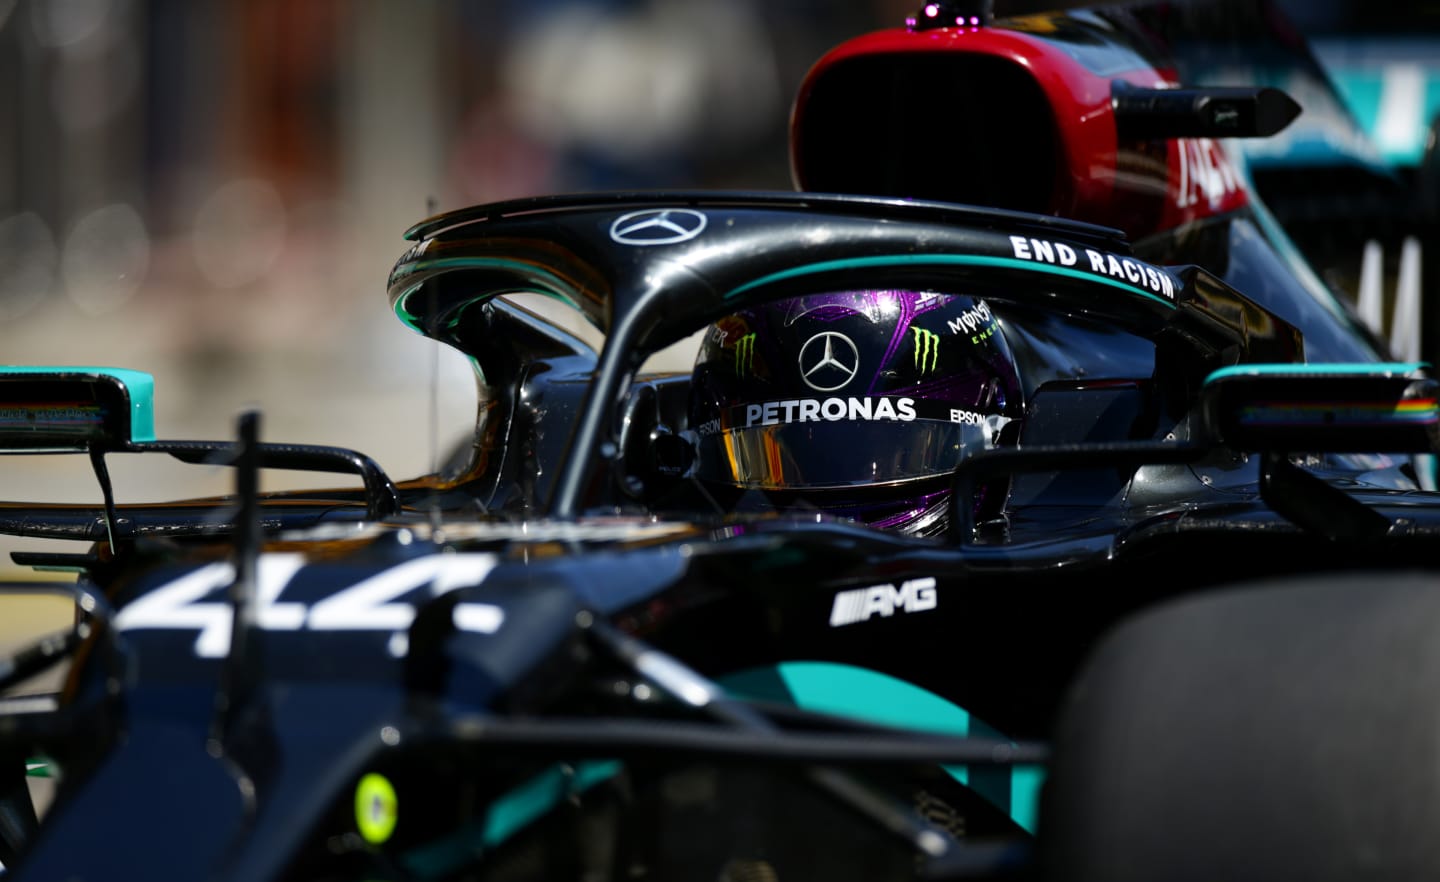 SPIELBERG, AUSTRIA - JULY 10: Lewis Hamilton of Great Britain driving the (44) Mercedes AMG Petronas F1 Team Mercedes W11 in the pit lane during practice for the F1 Grand Prix of Styria at Red Bull Ring on July 10, 2020 in Spielberg, Austria. (Photo by Peter Fox/Getty Images)